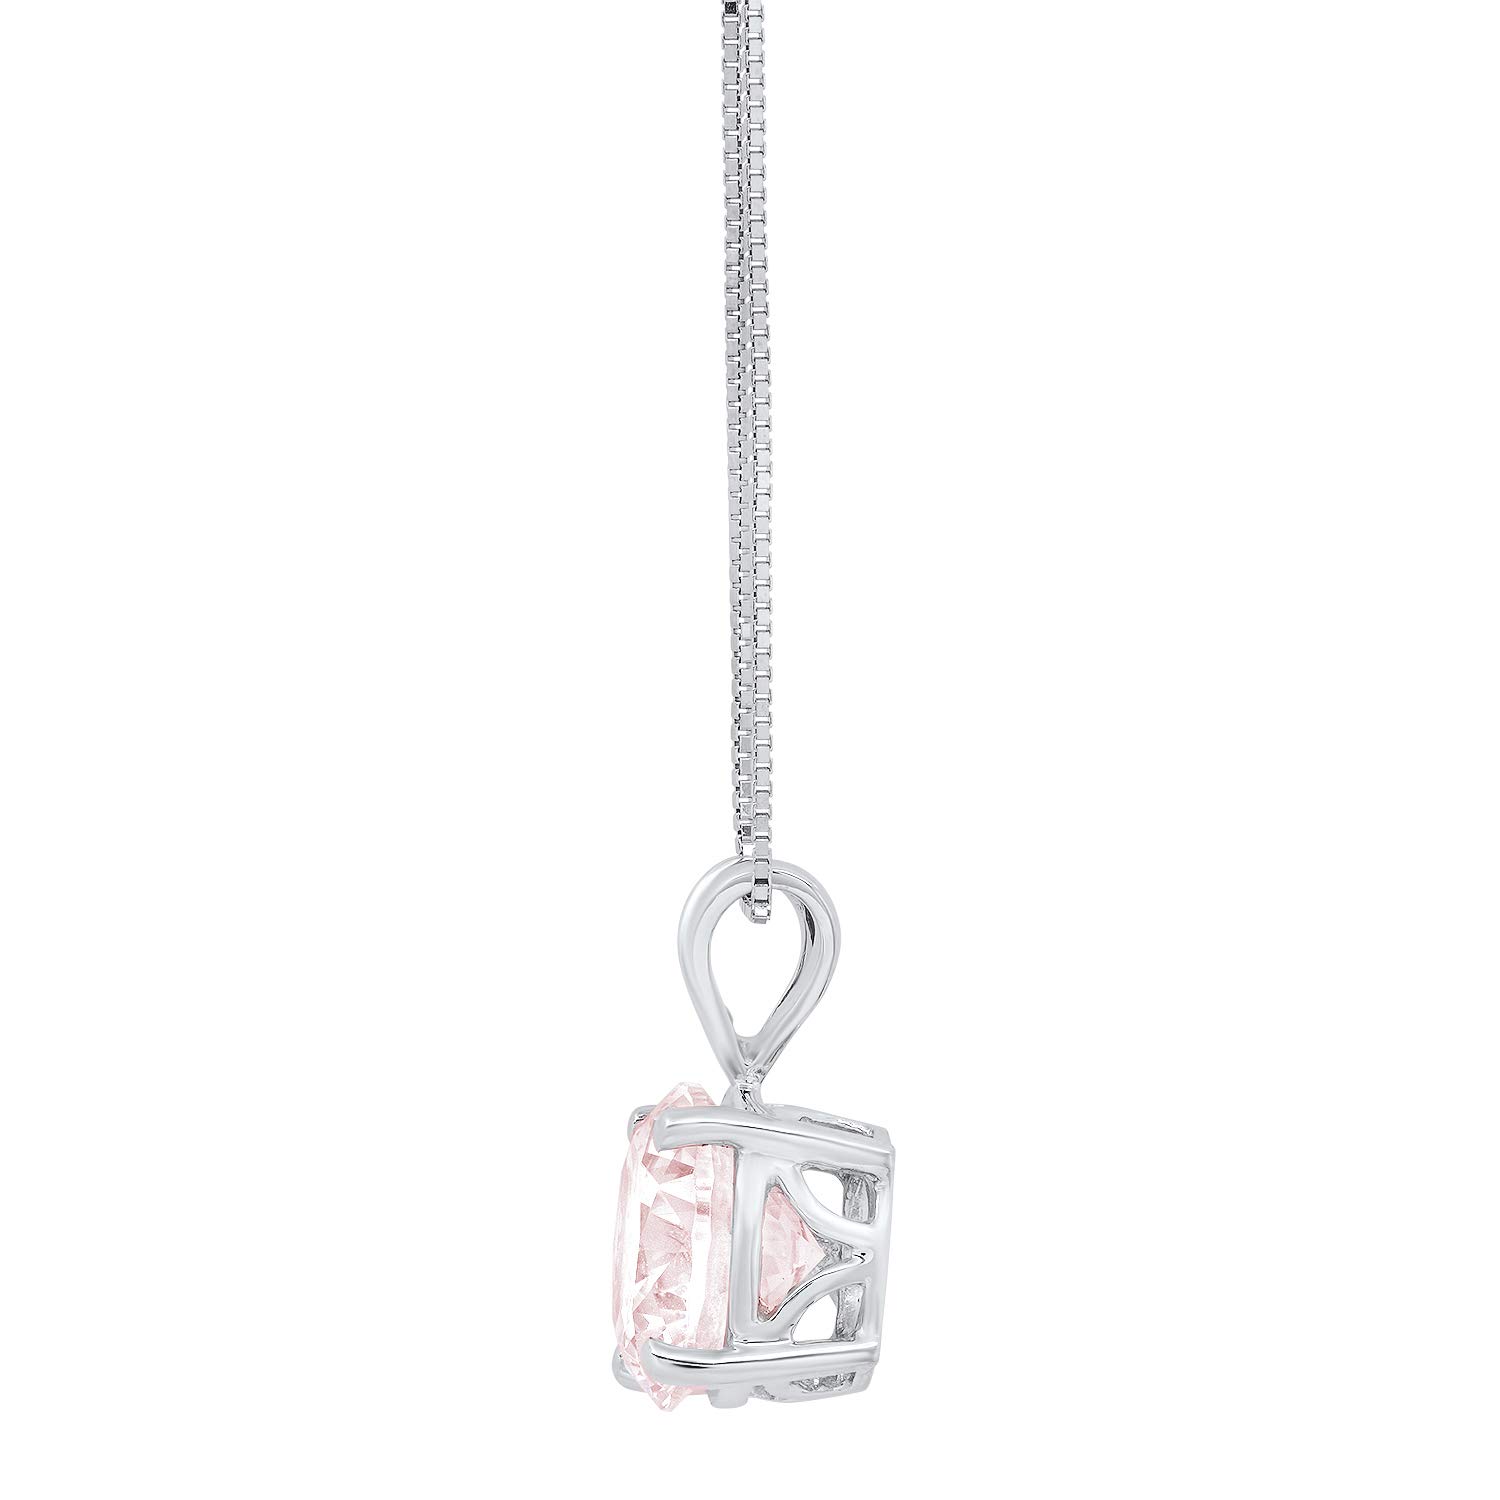 3.0 ct Brilliant Round Cut Stunning Genuine Pink Simulated Diamond CZ Ideal VVS1 D Solitaire Pendant Necklace With 18